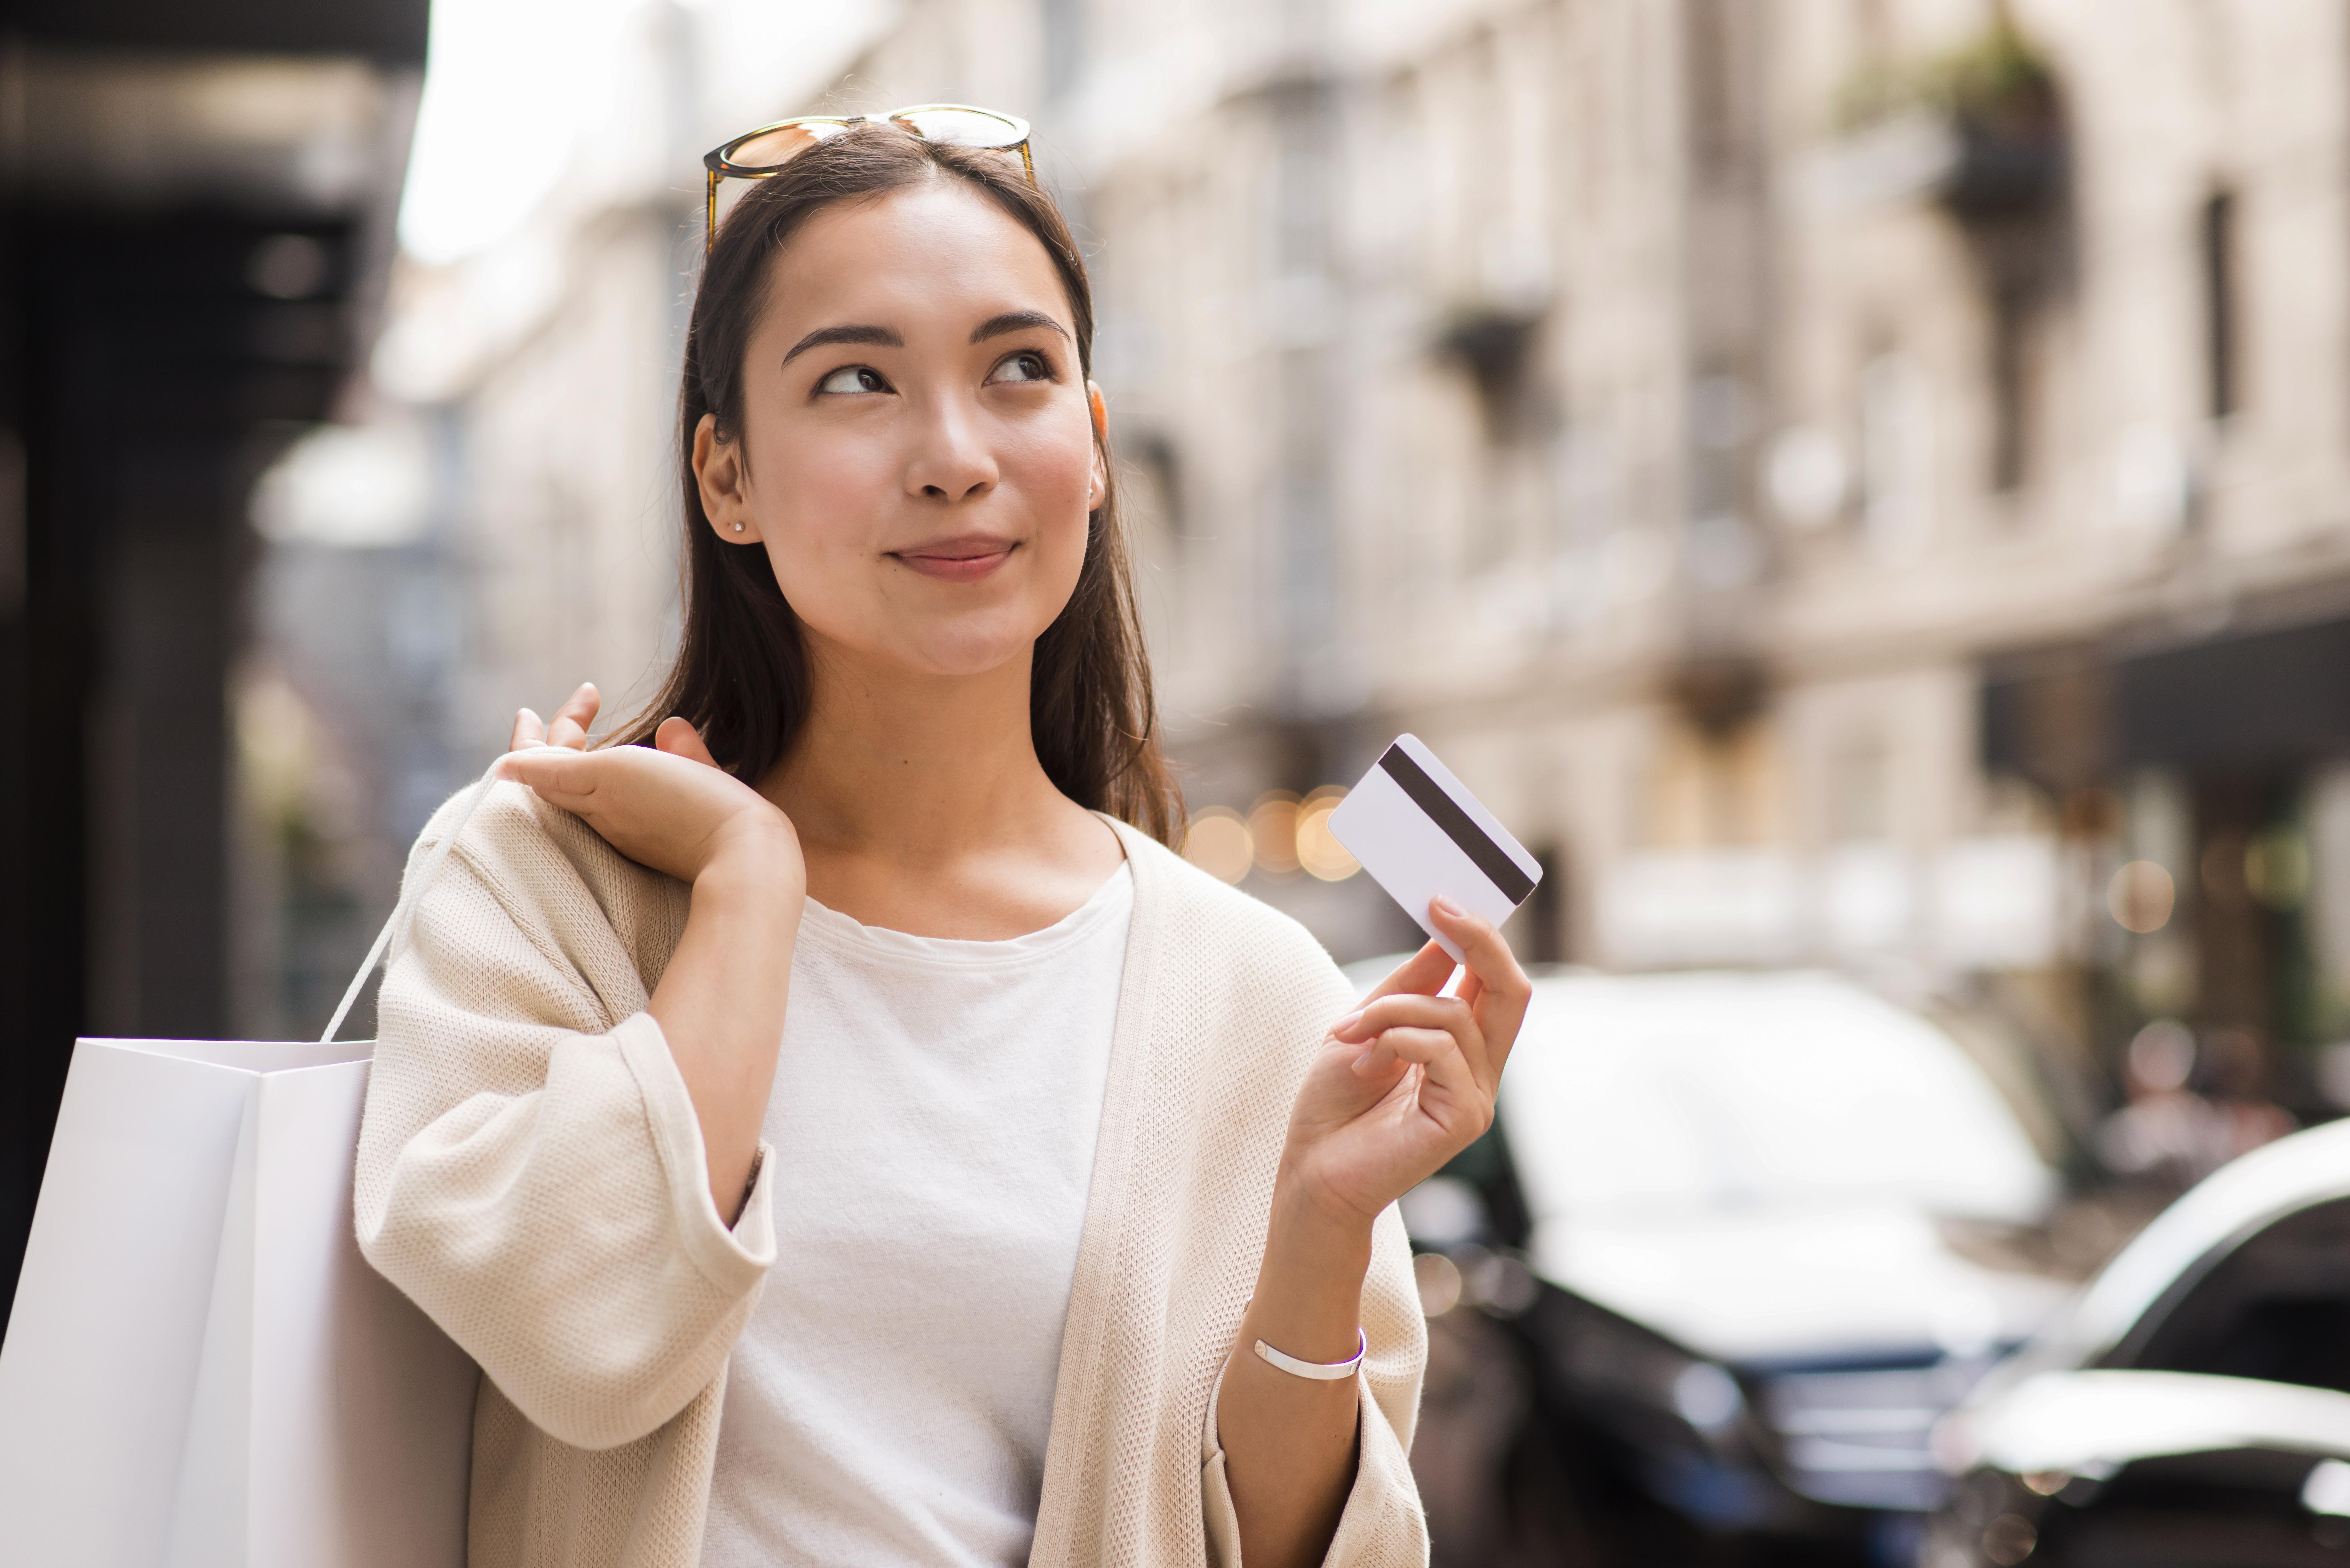 https://img.moneyduck.com/article_attachment/1670314085-woman-outdoors-holding-credit-card-shopping-bag.jpg